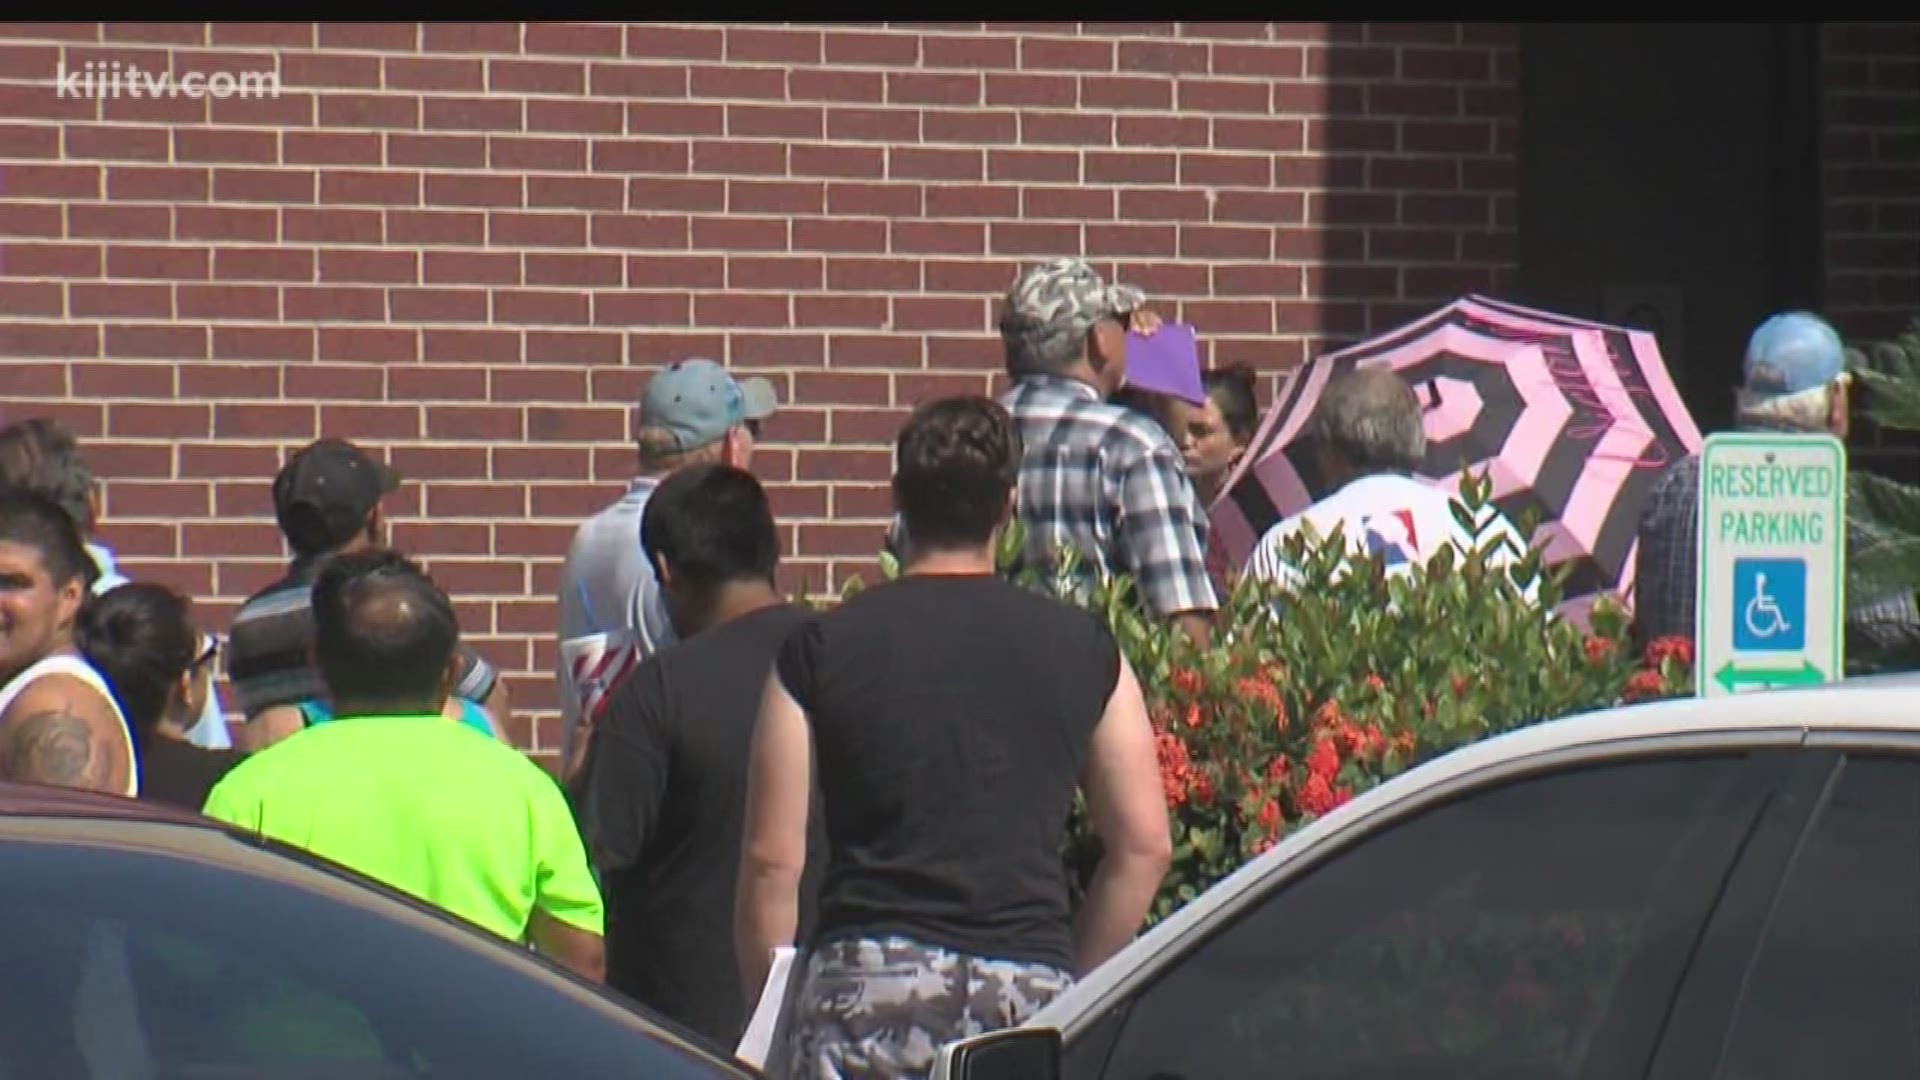 If you have any business to conduct at Corpus Christi's Social Security office on Port Avenue, be prepared to wait in line outside -- in the heat.